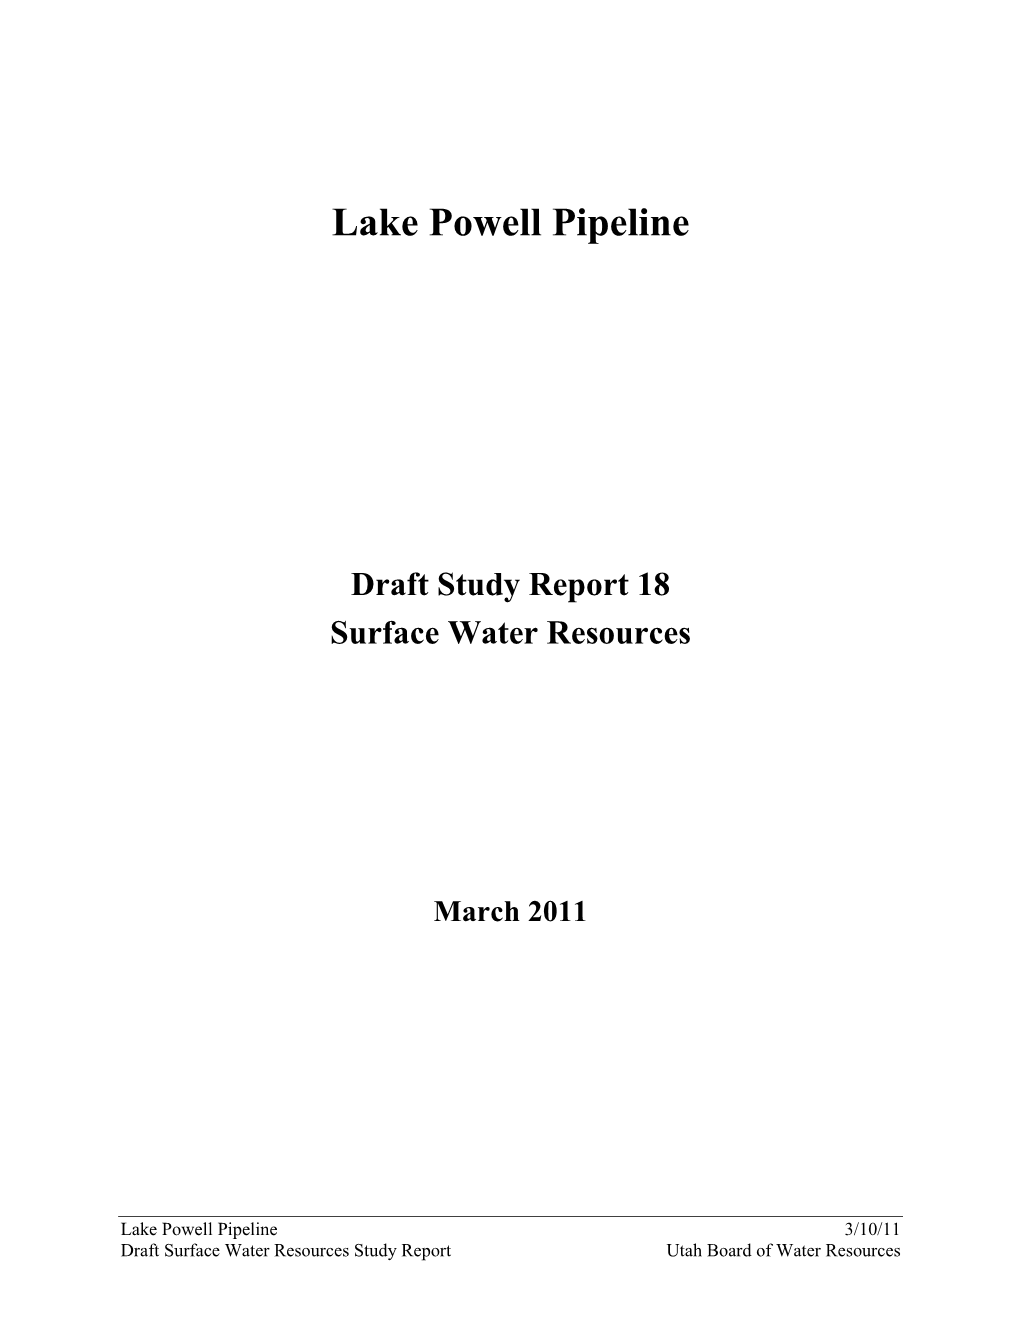 Draft Surface Water Resources Report